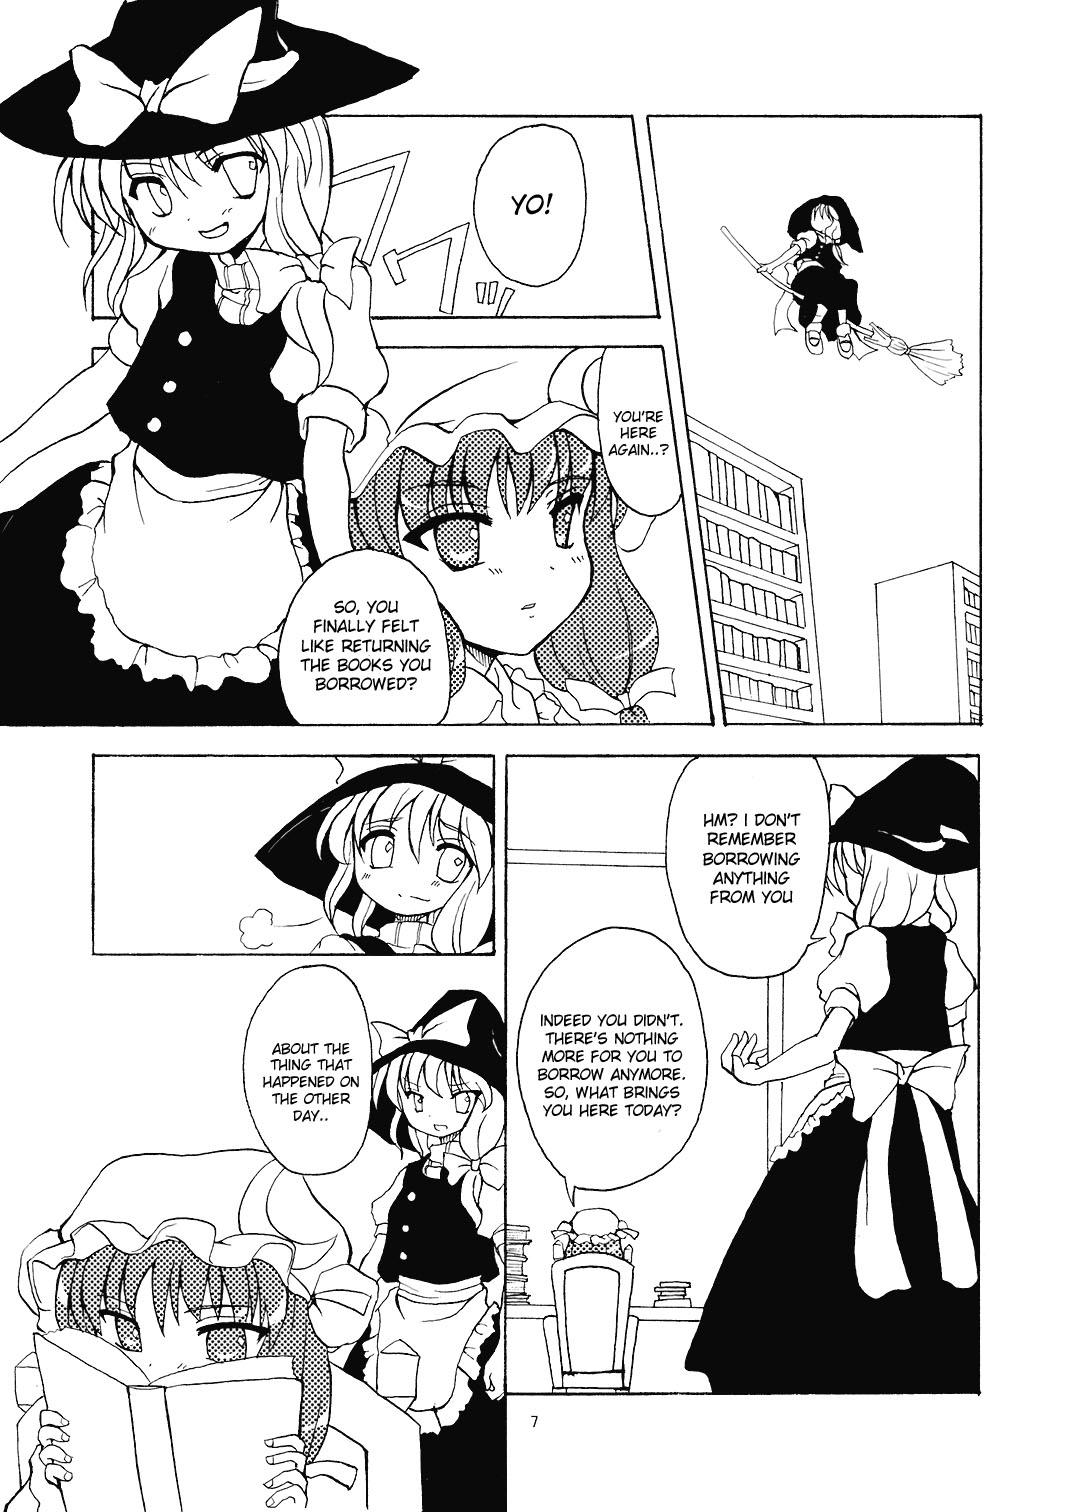 Strapon Alice in Scarlet Mansion 2 - Touhou project Hardcore Sex - Page 7